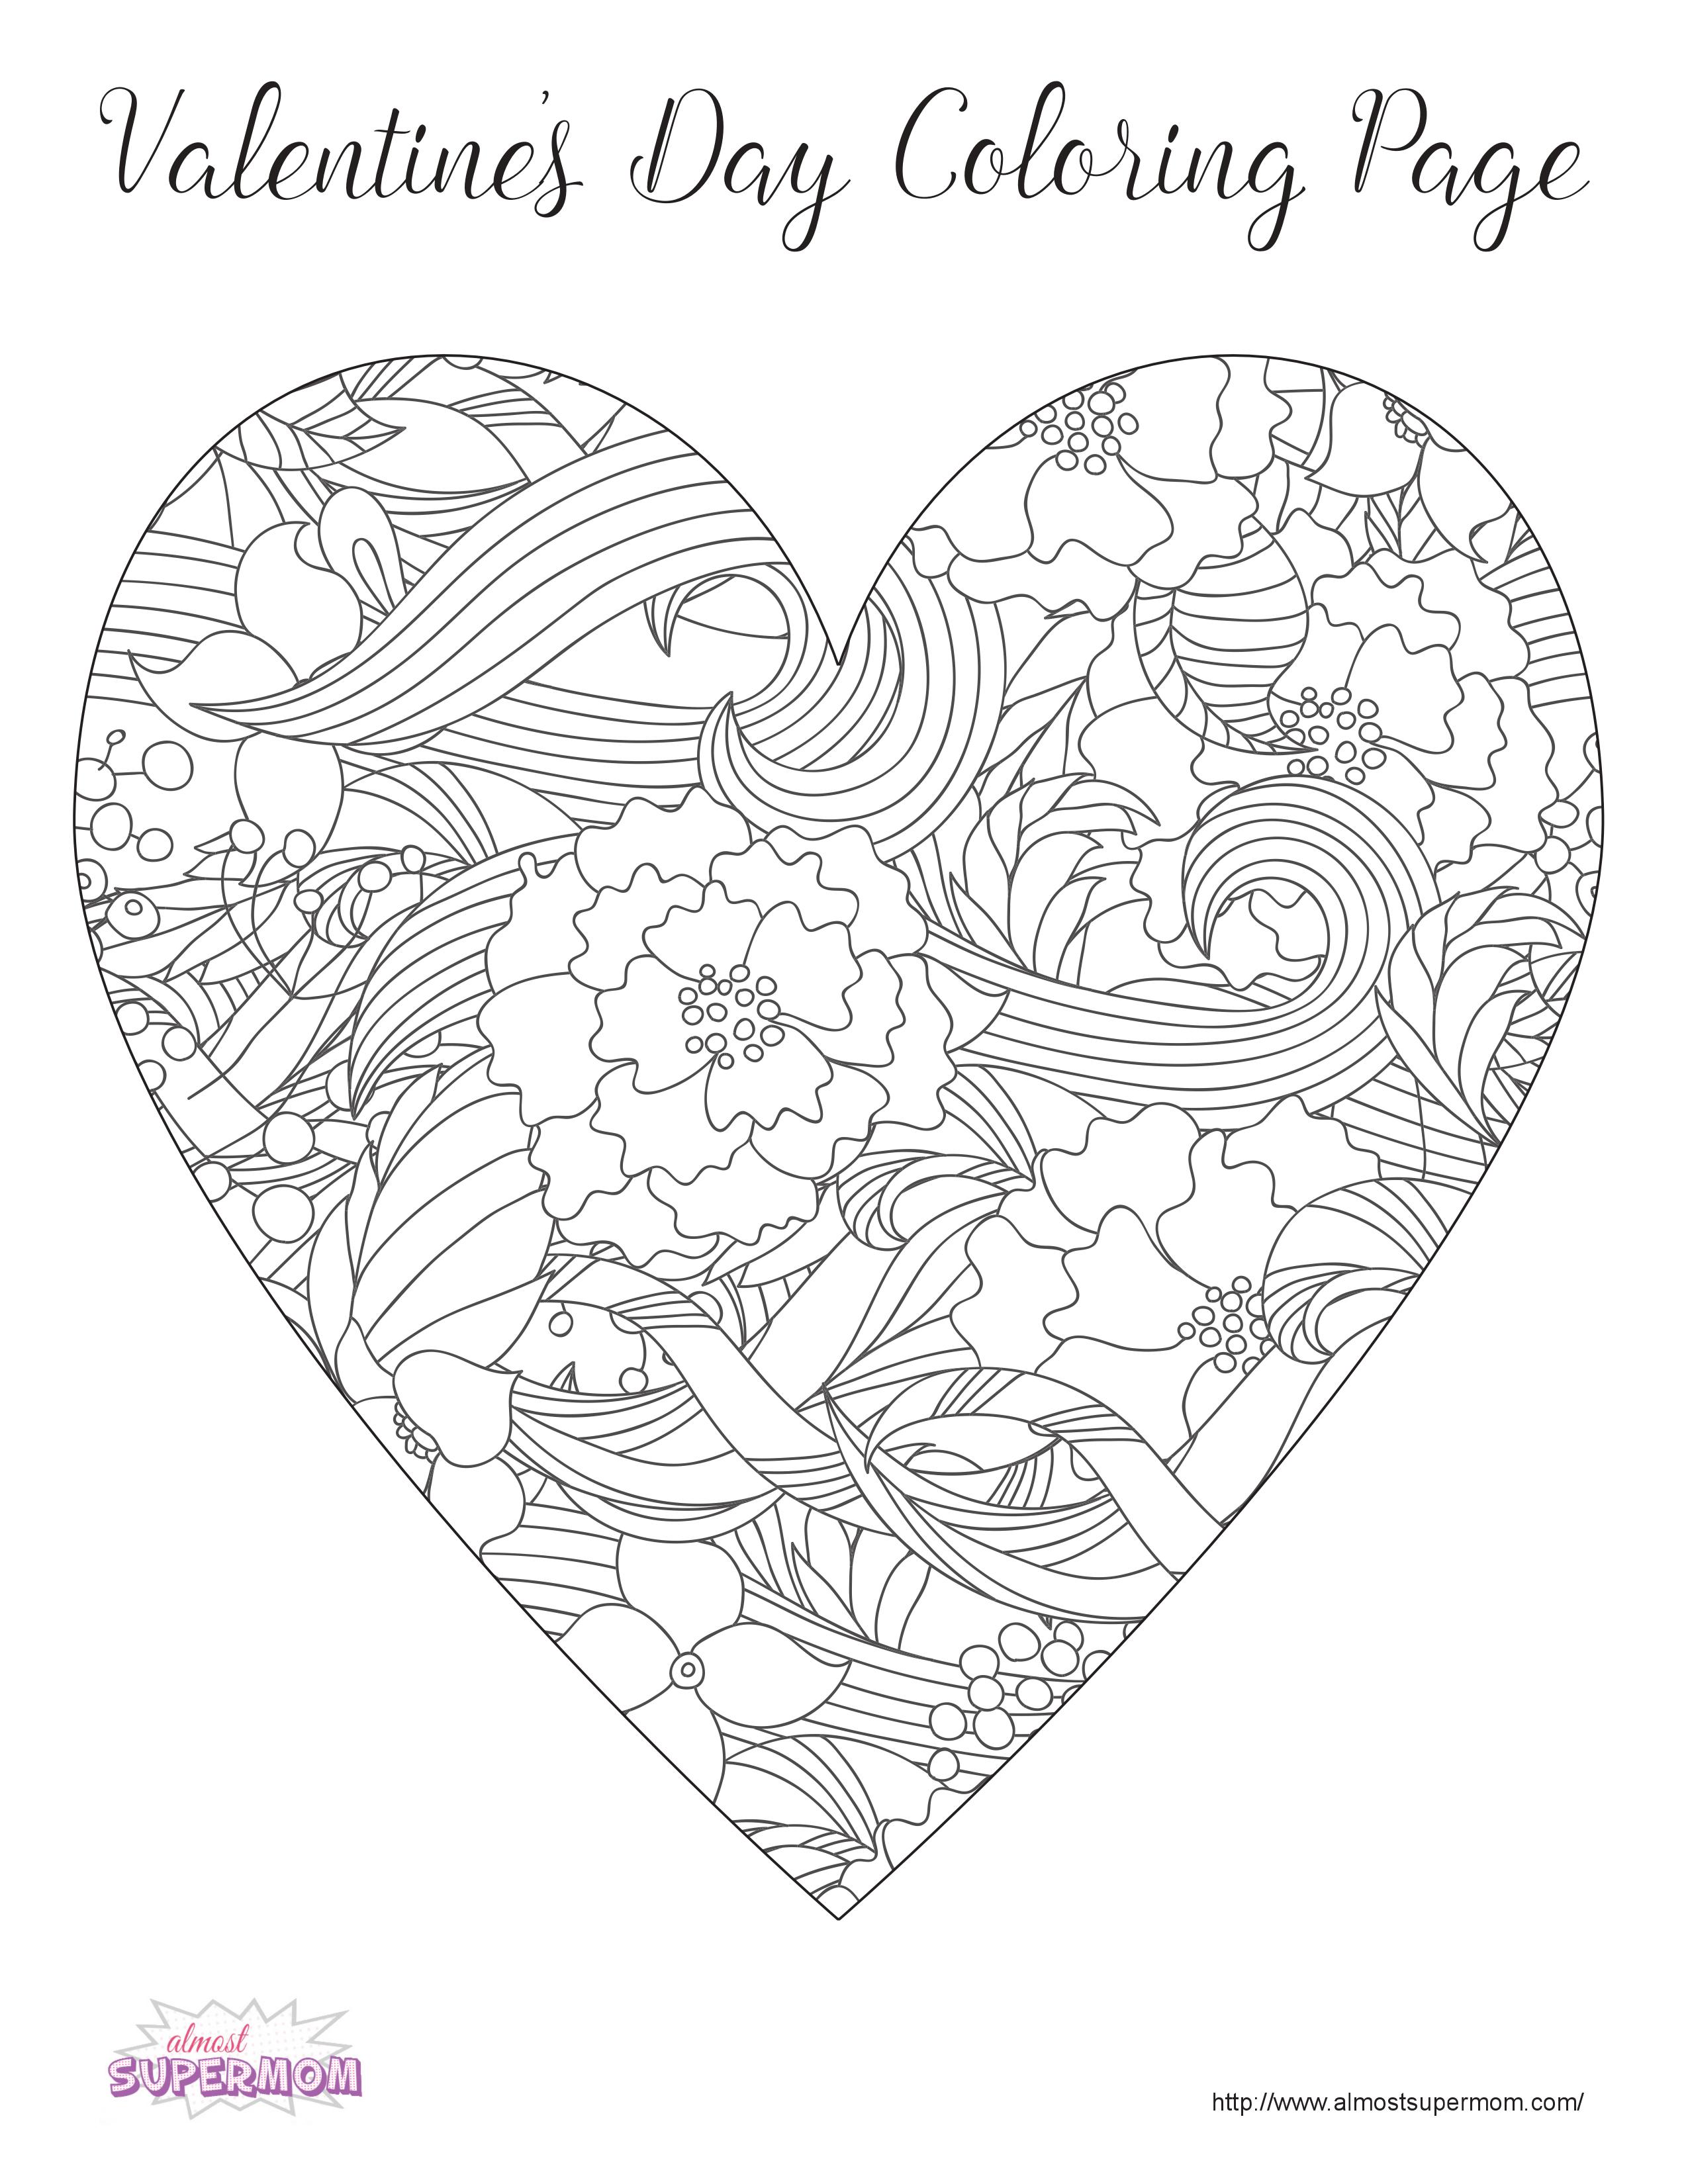 Coloring Pages Kindergarten Valentines 182 File Include SVG PNG EPS DXF